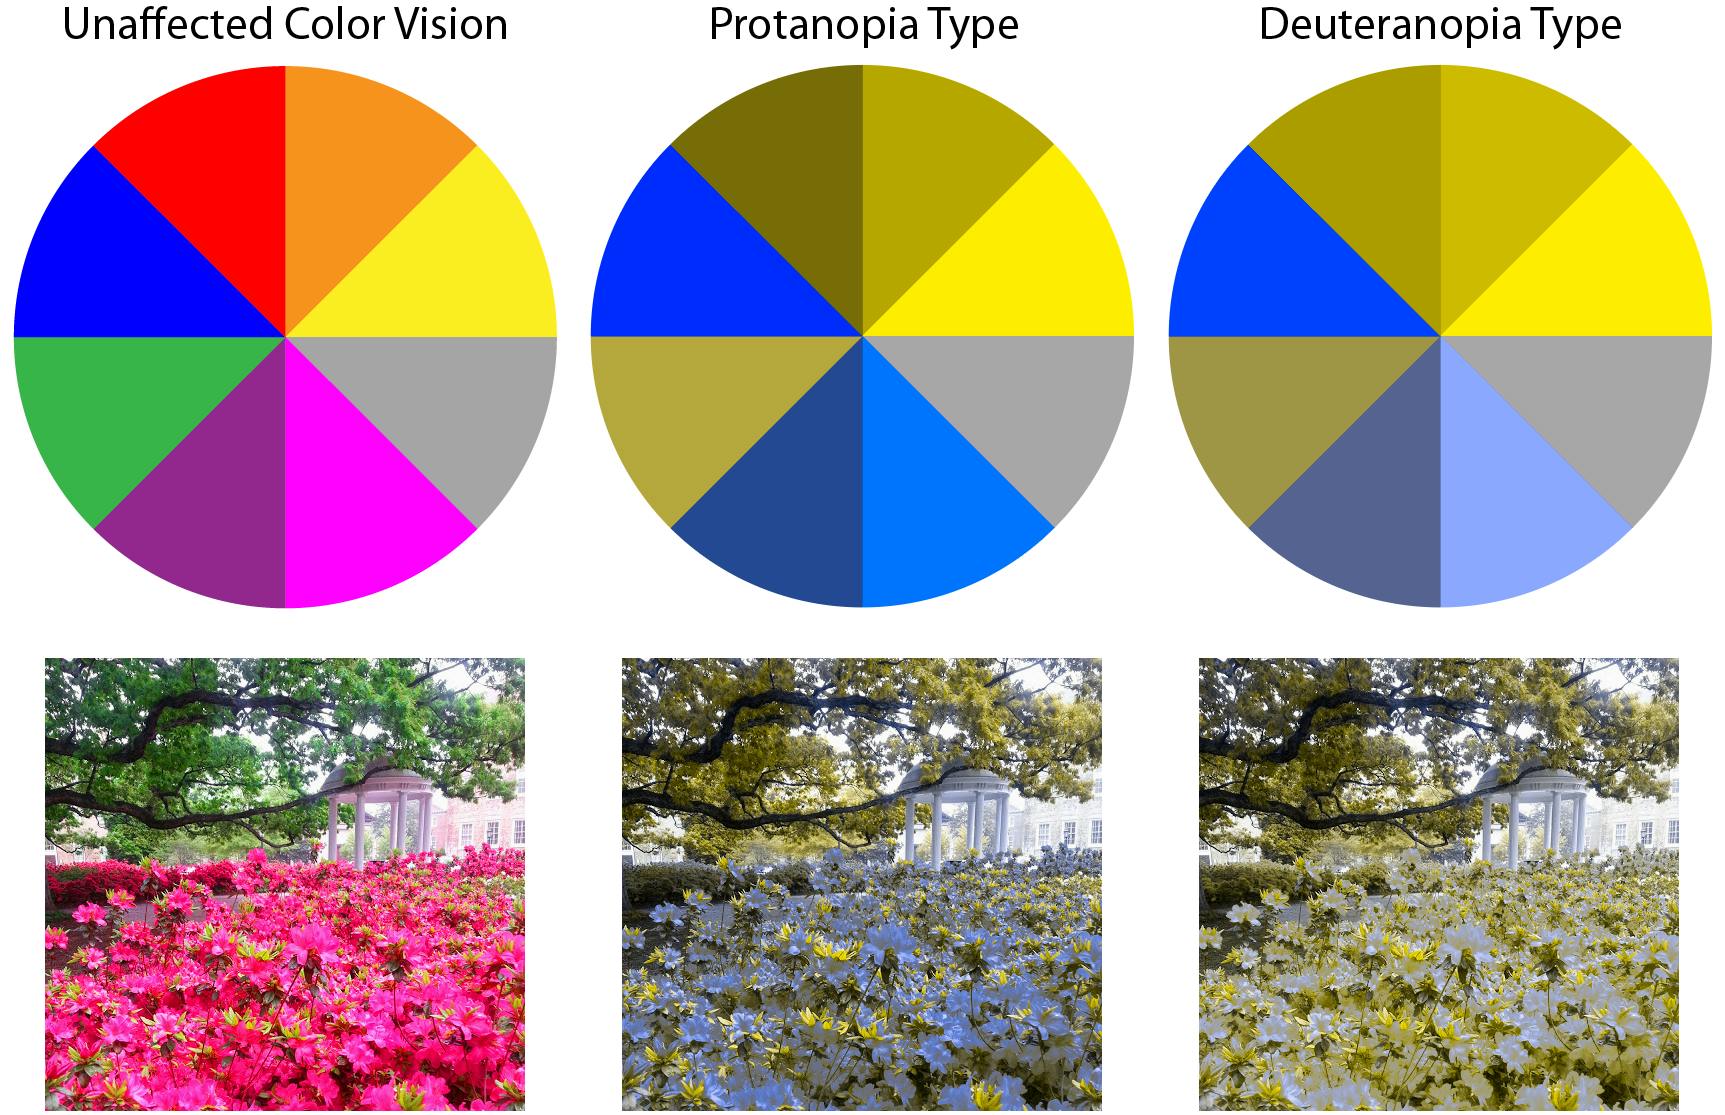 The differences between different kinds of colorblindness shown by comparing an picture of flowers